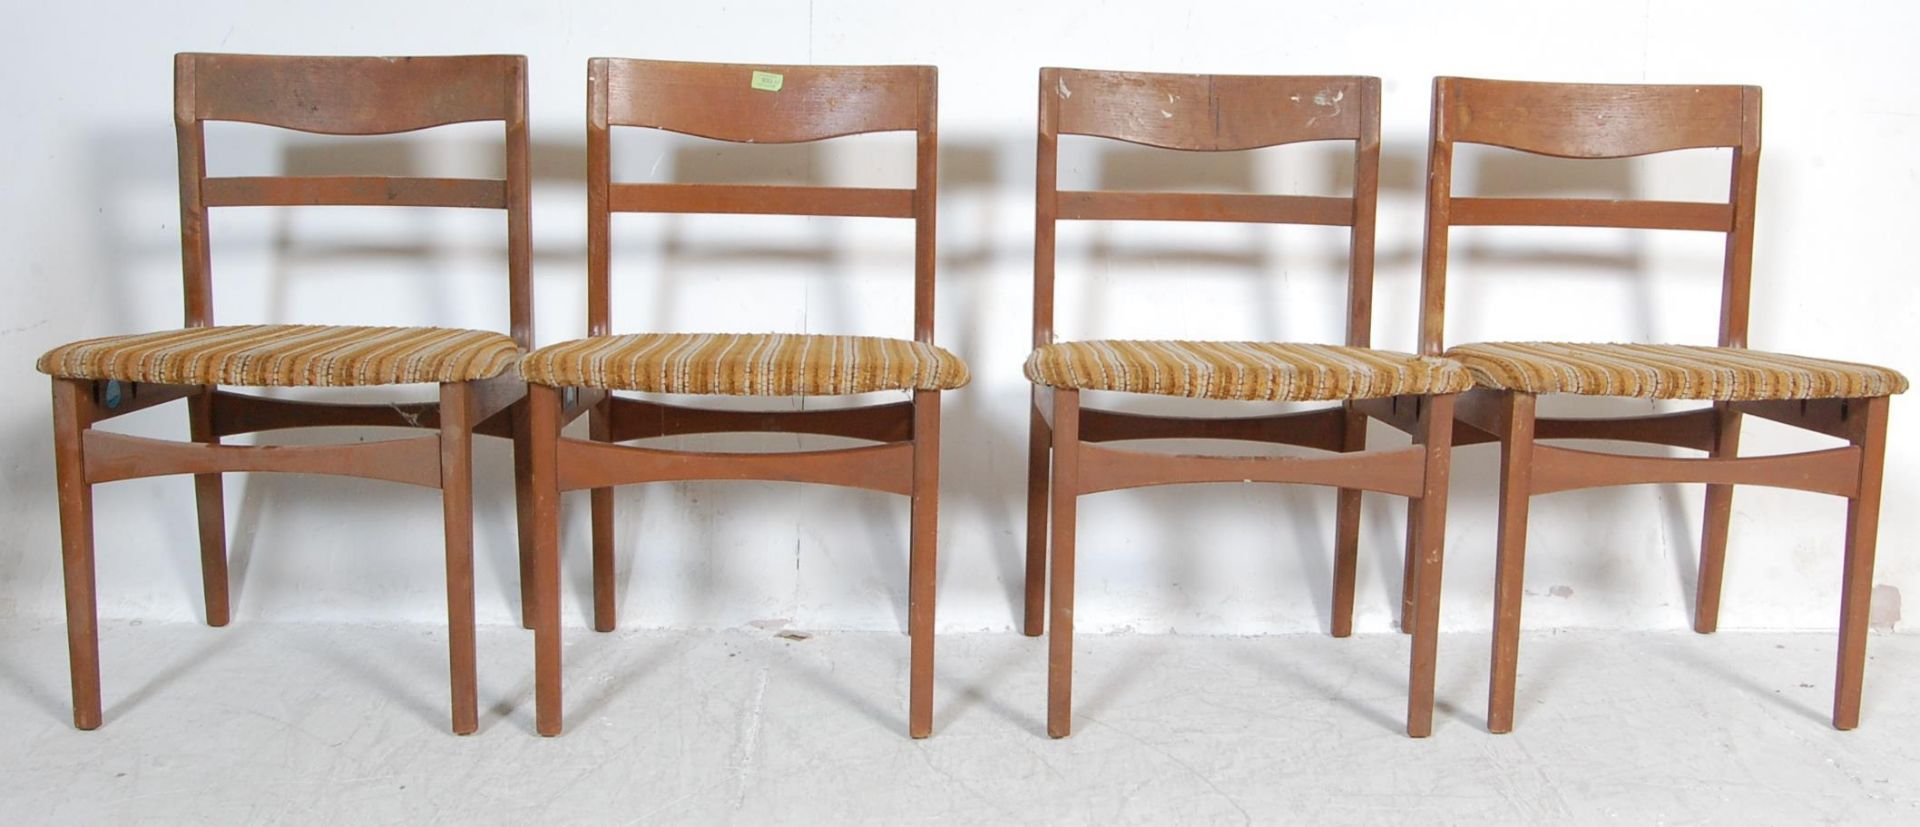 FOUR VINTAGE TEAK WOOD FRAME DINING CHAIRS BY NATHAN